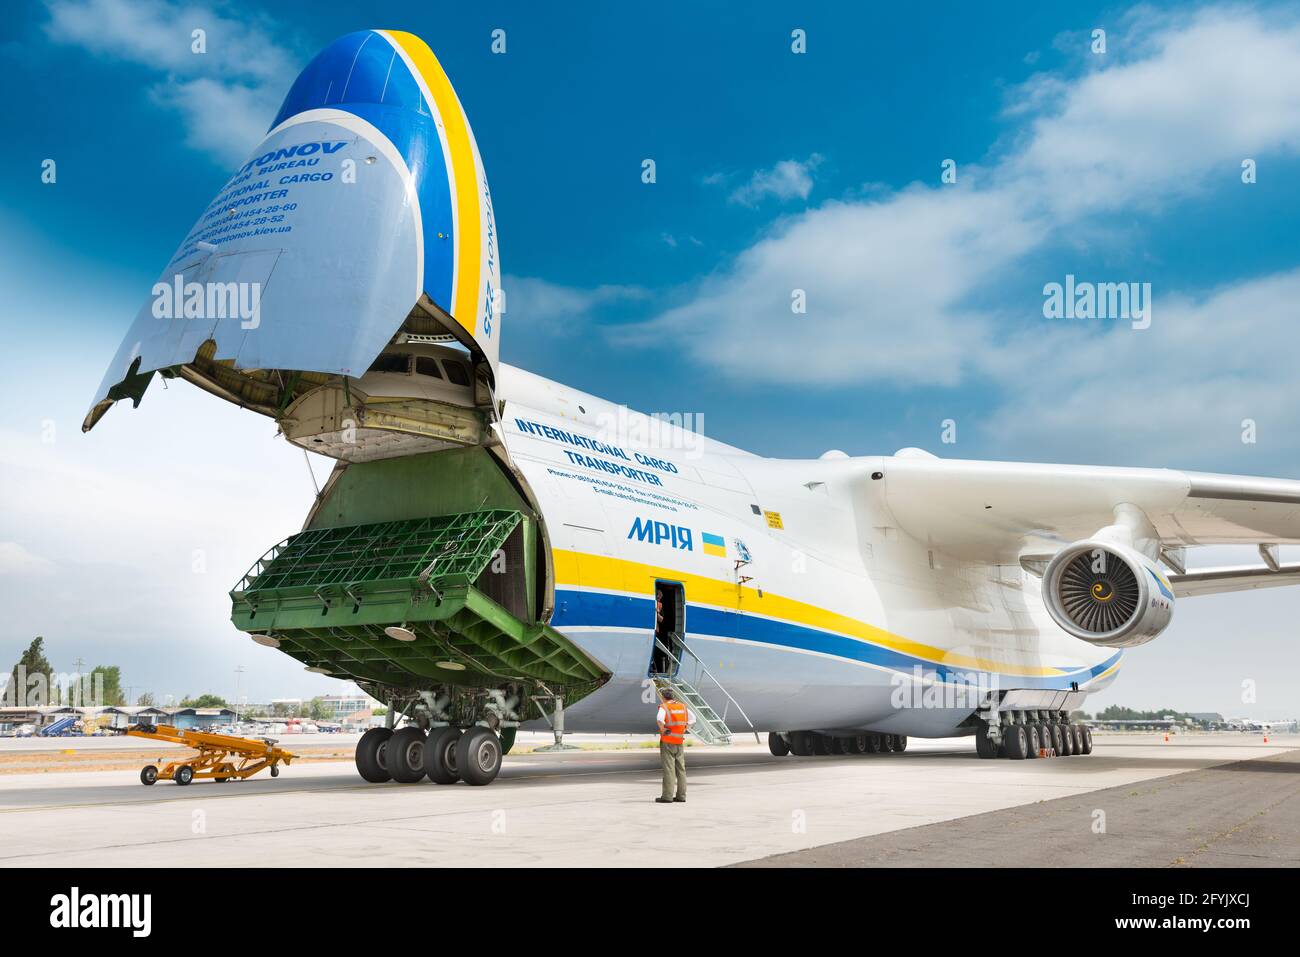 Santiago de Chile, Metropolitan Region, Chile, South America - The Antonov 225 also know as AN-225 and the biggest airplane in the world. Stock Photo